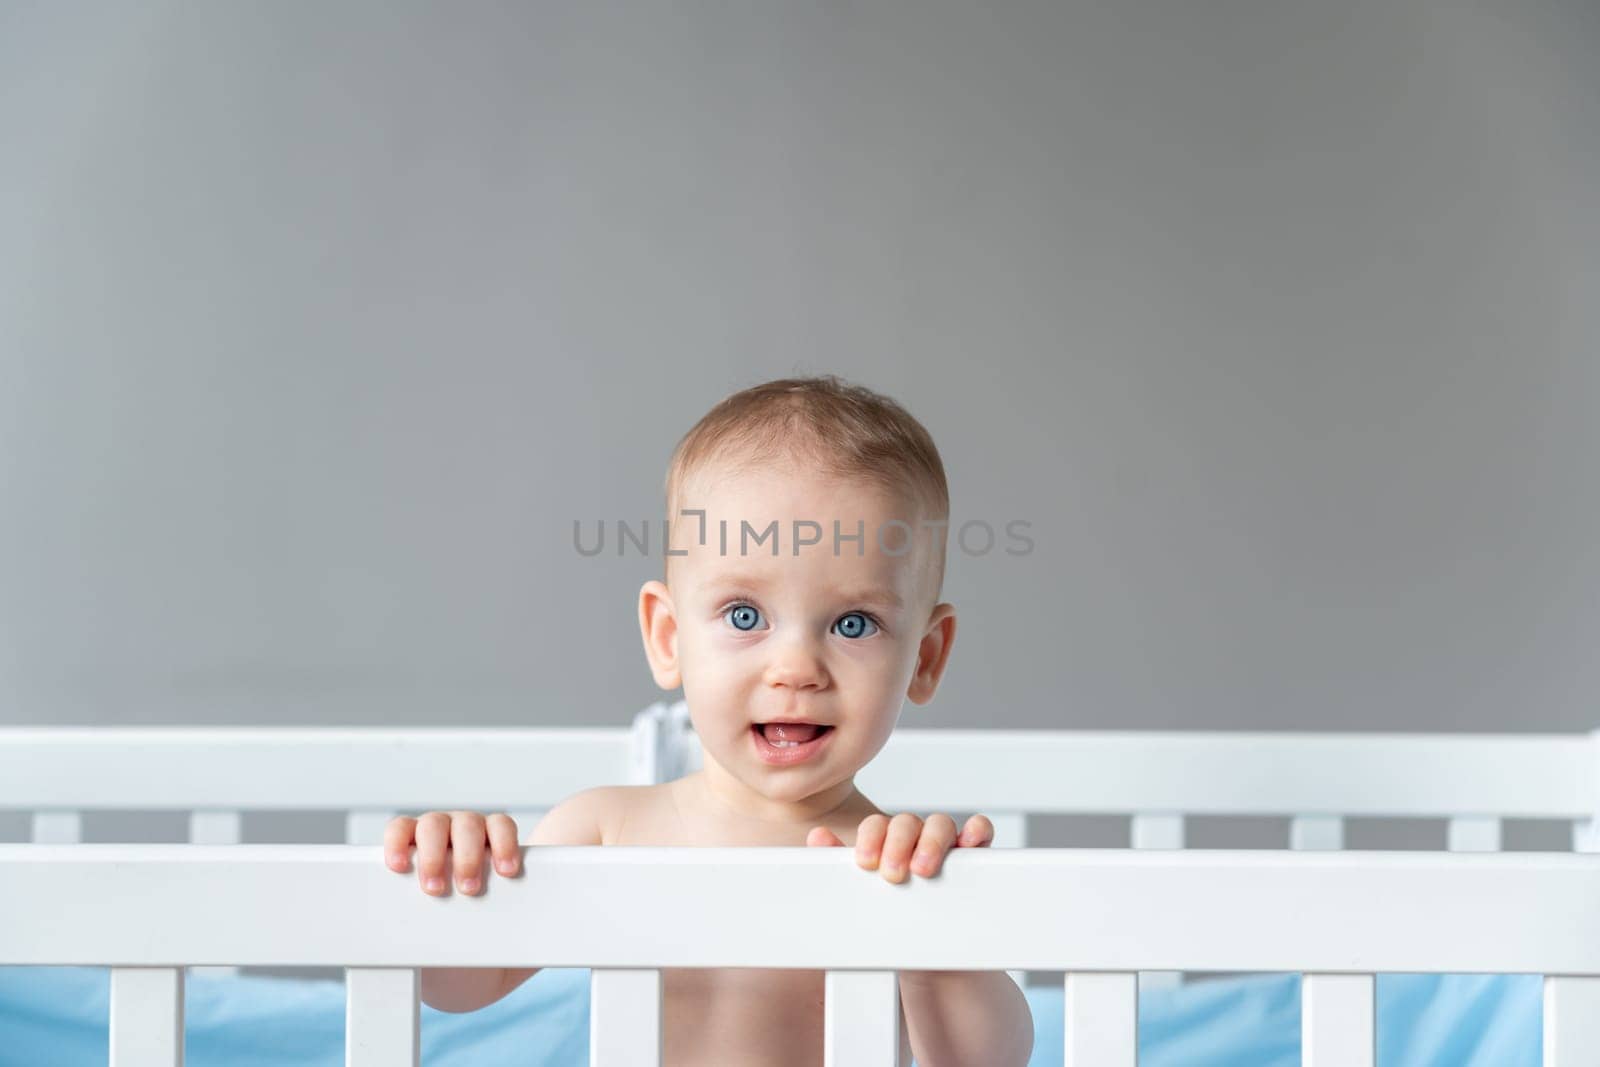 A modestly smiling baby leaned on the back of a wooden crib.